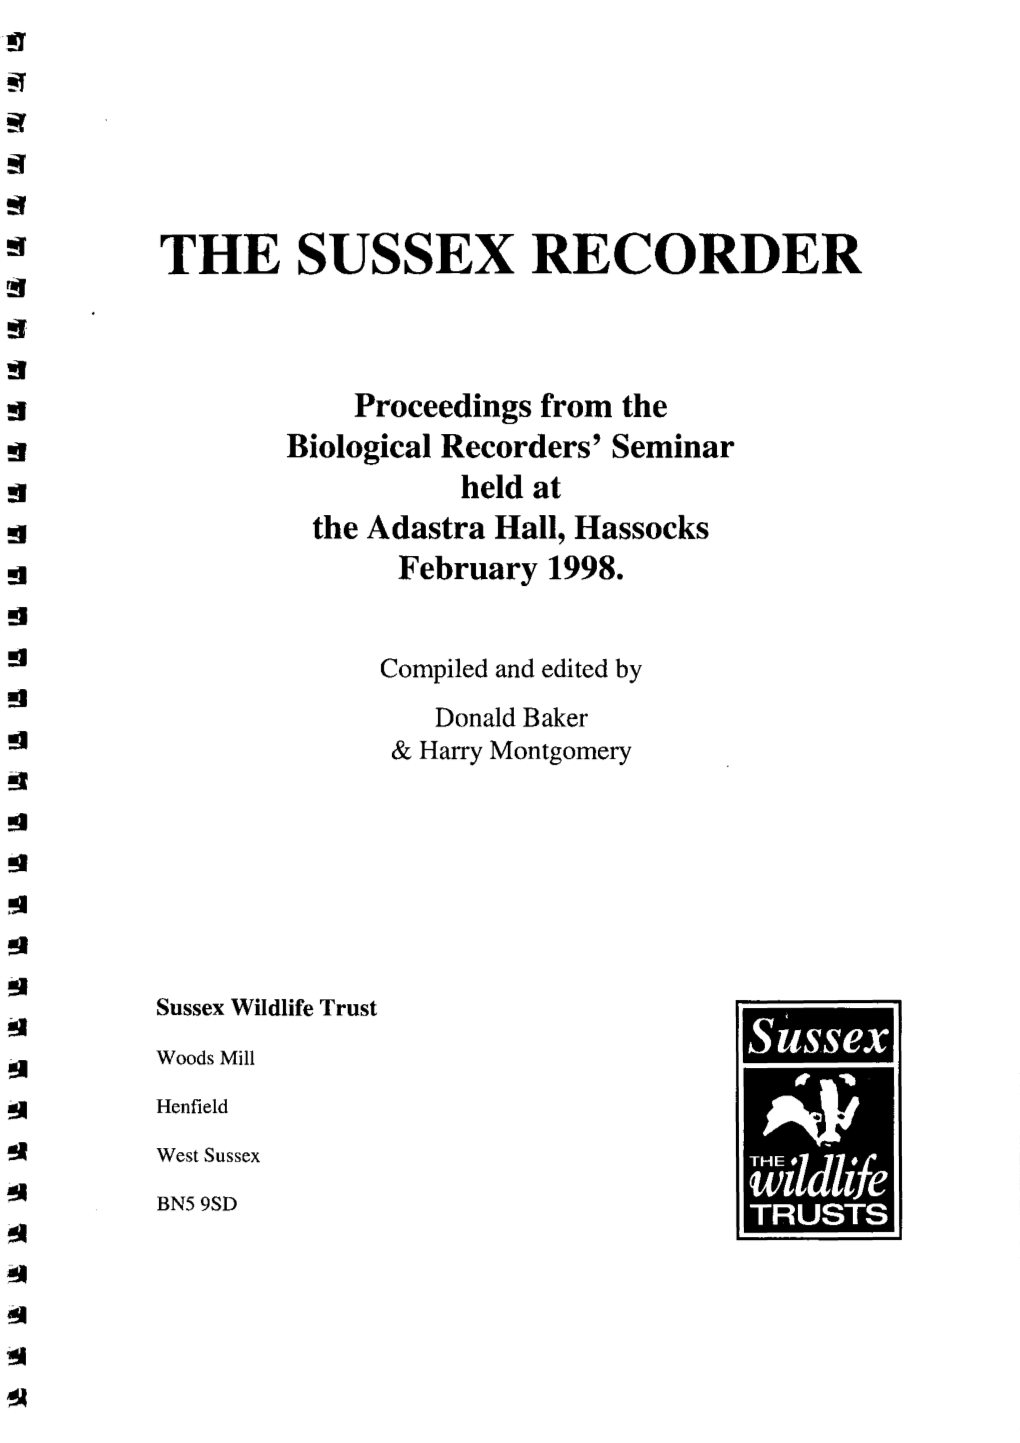 THE SUSSEX RECORDER !!I !I !I !I Proceedings from the Biological Recorders' Seminar Held at the Adastra Hall, Hassocks February 1998